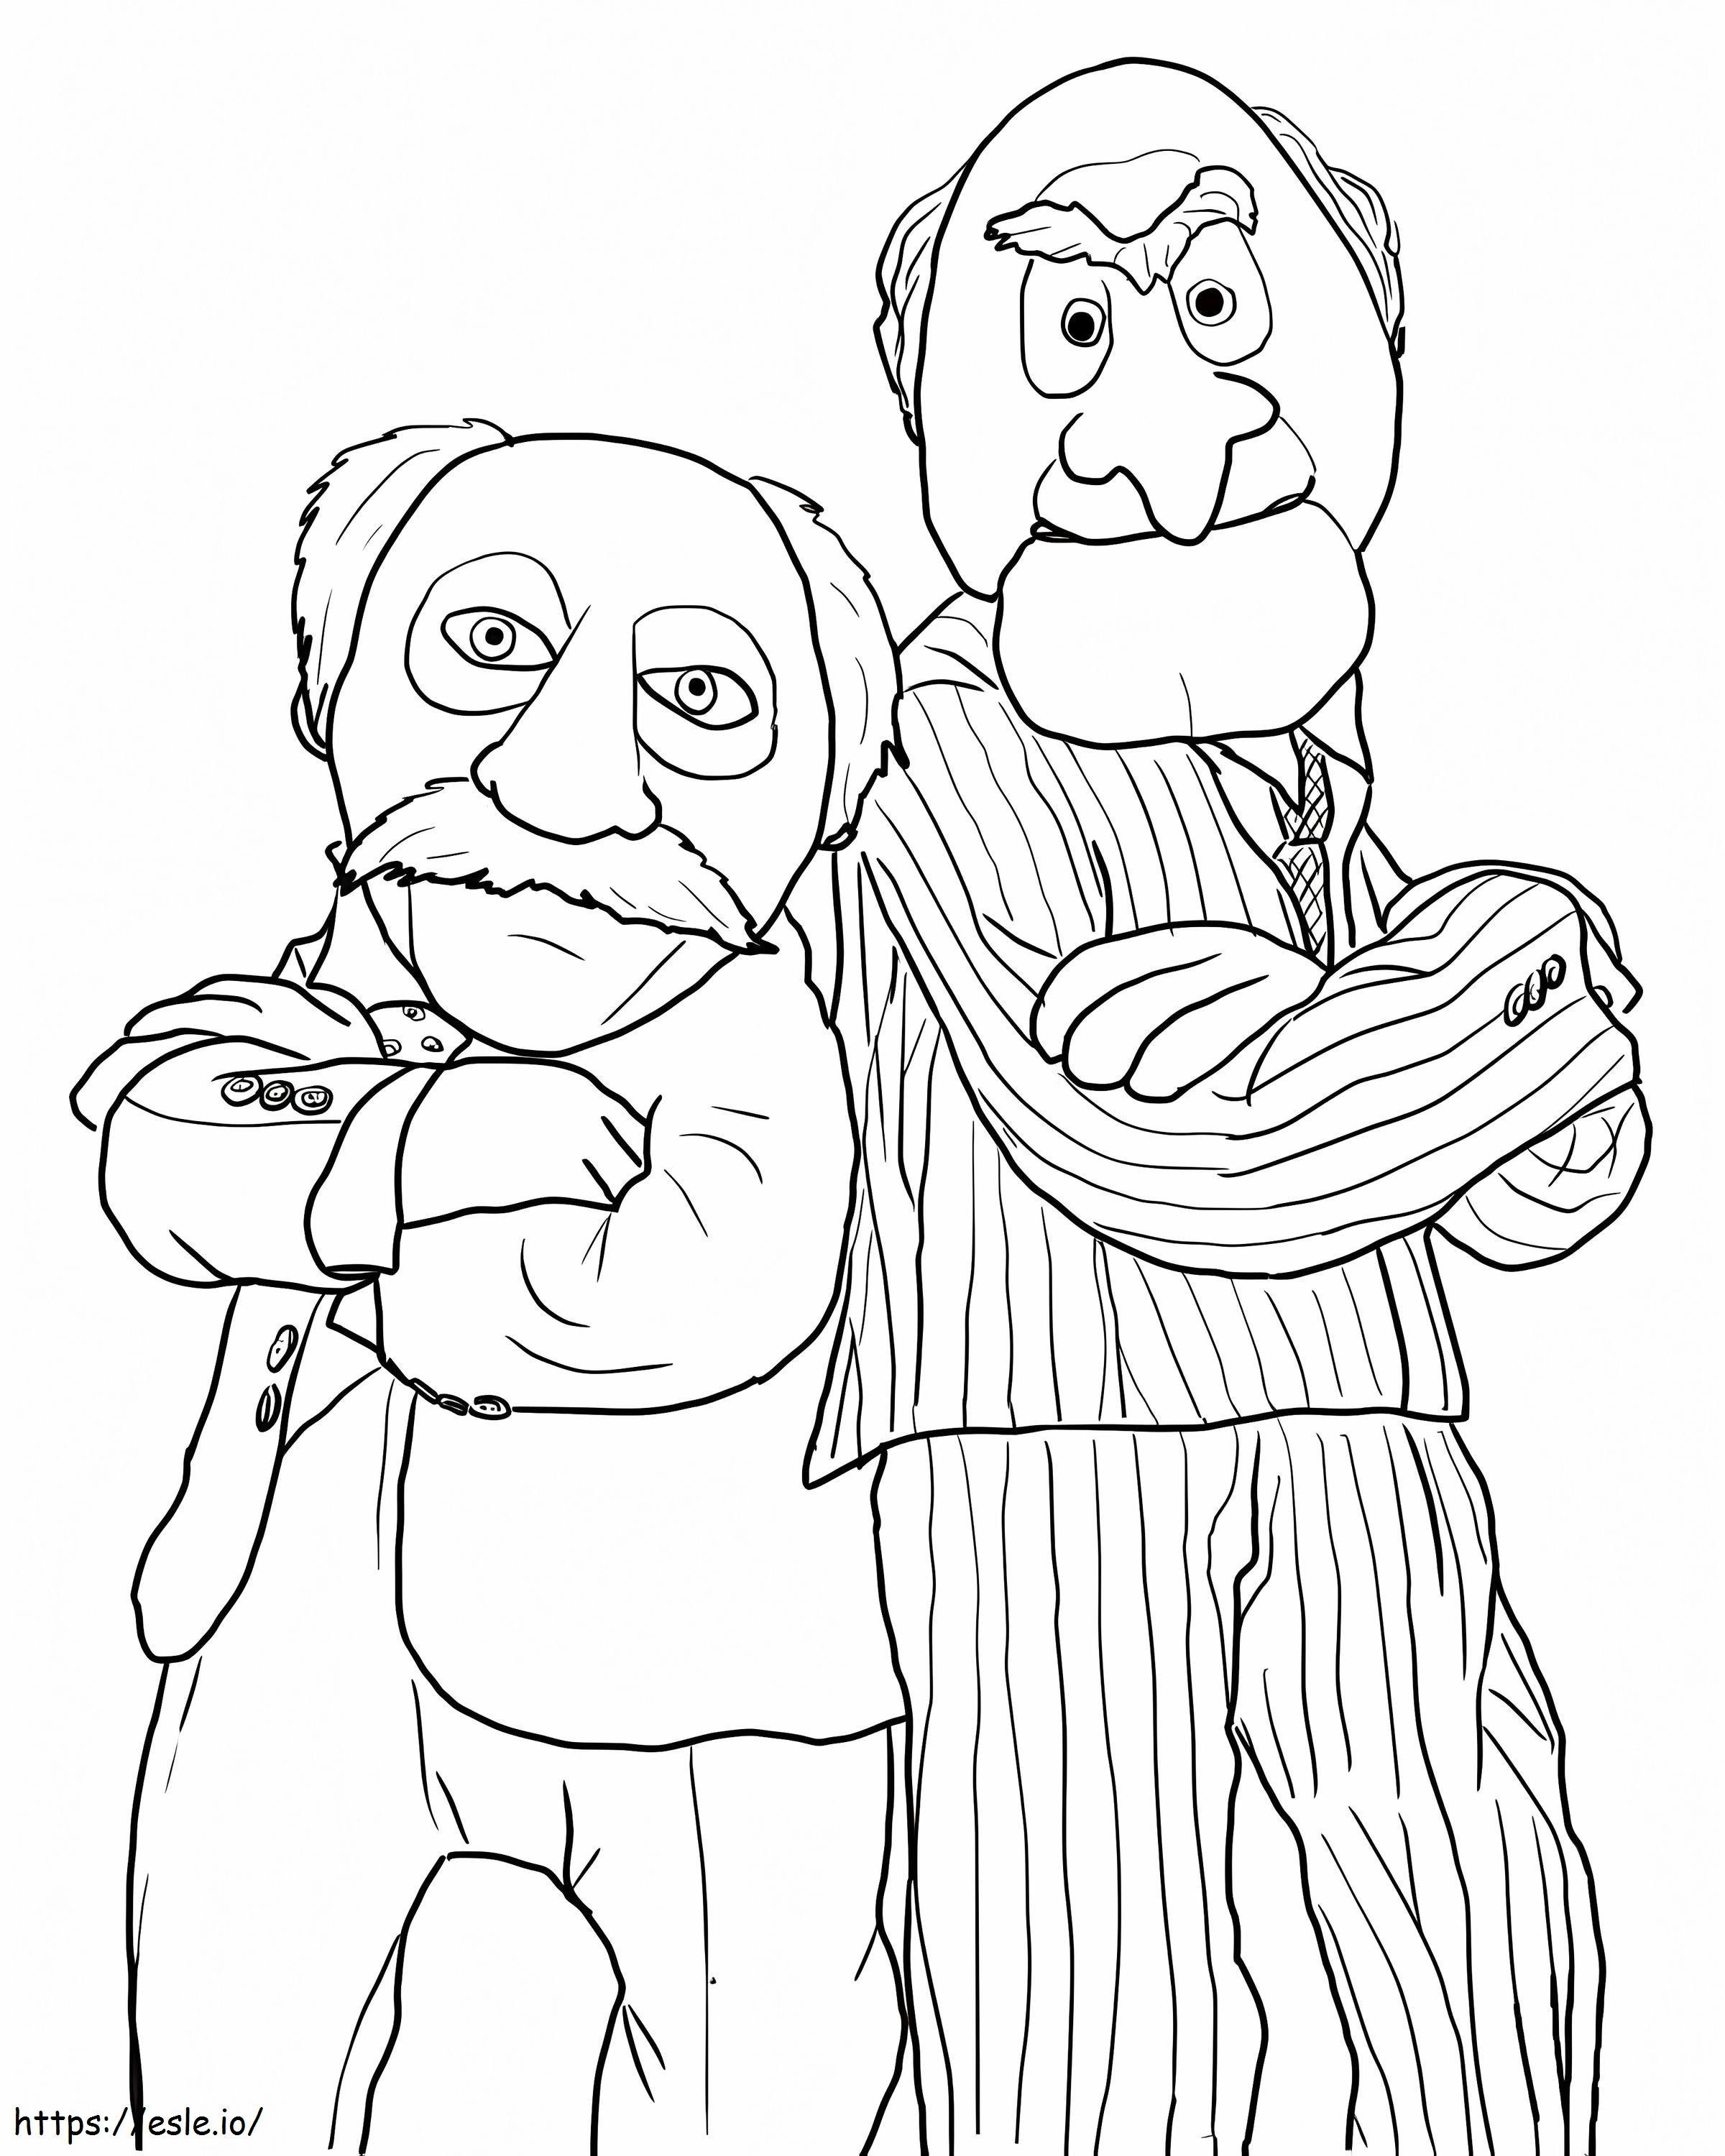 Statler And Waldorf From The Muppets coloring page